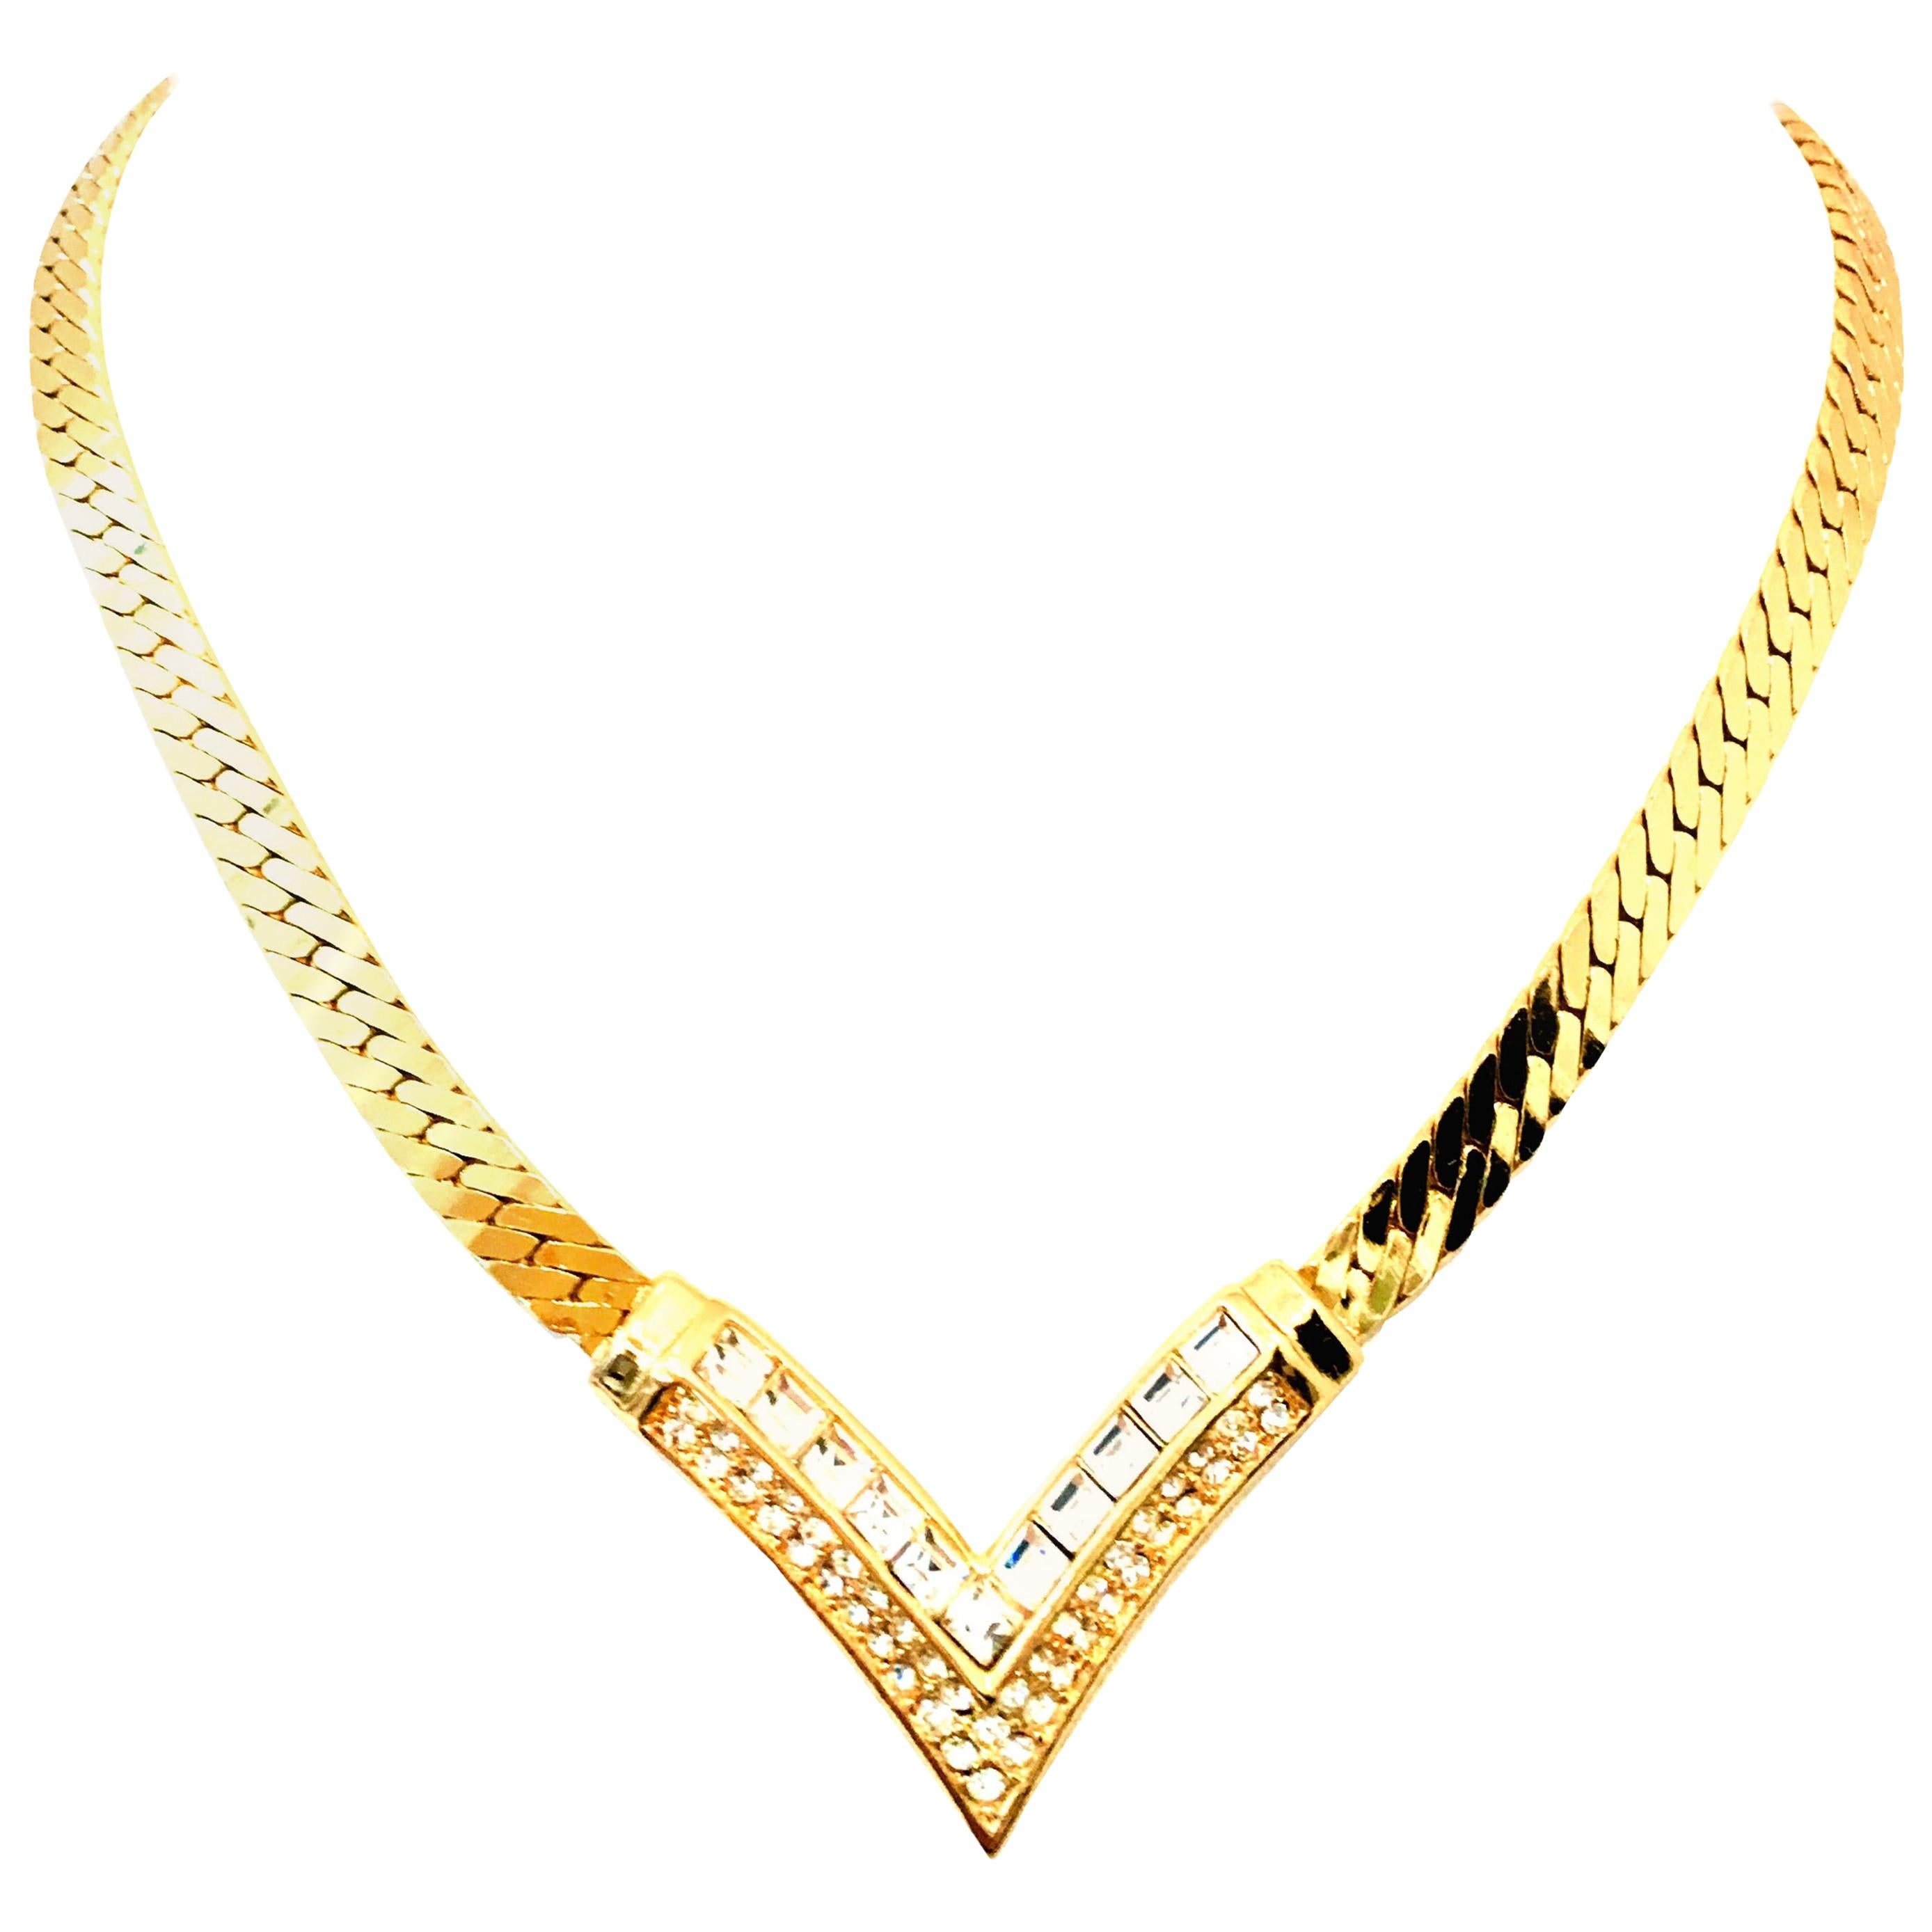 20th Century Gold & Austrian Crystal "V" Necklace by, Christian Dior For Sale